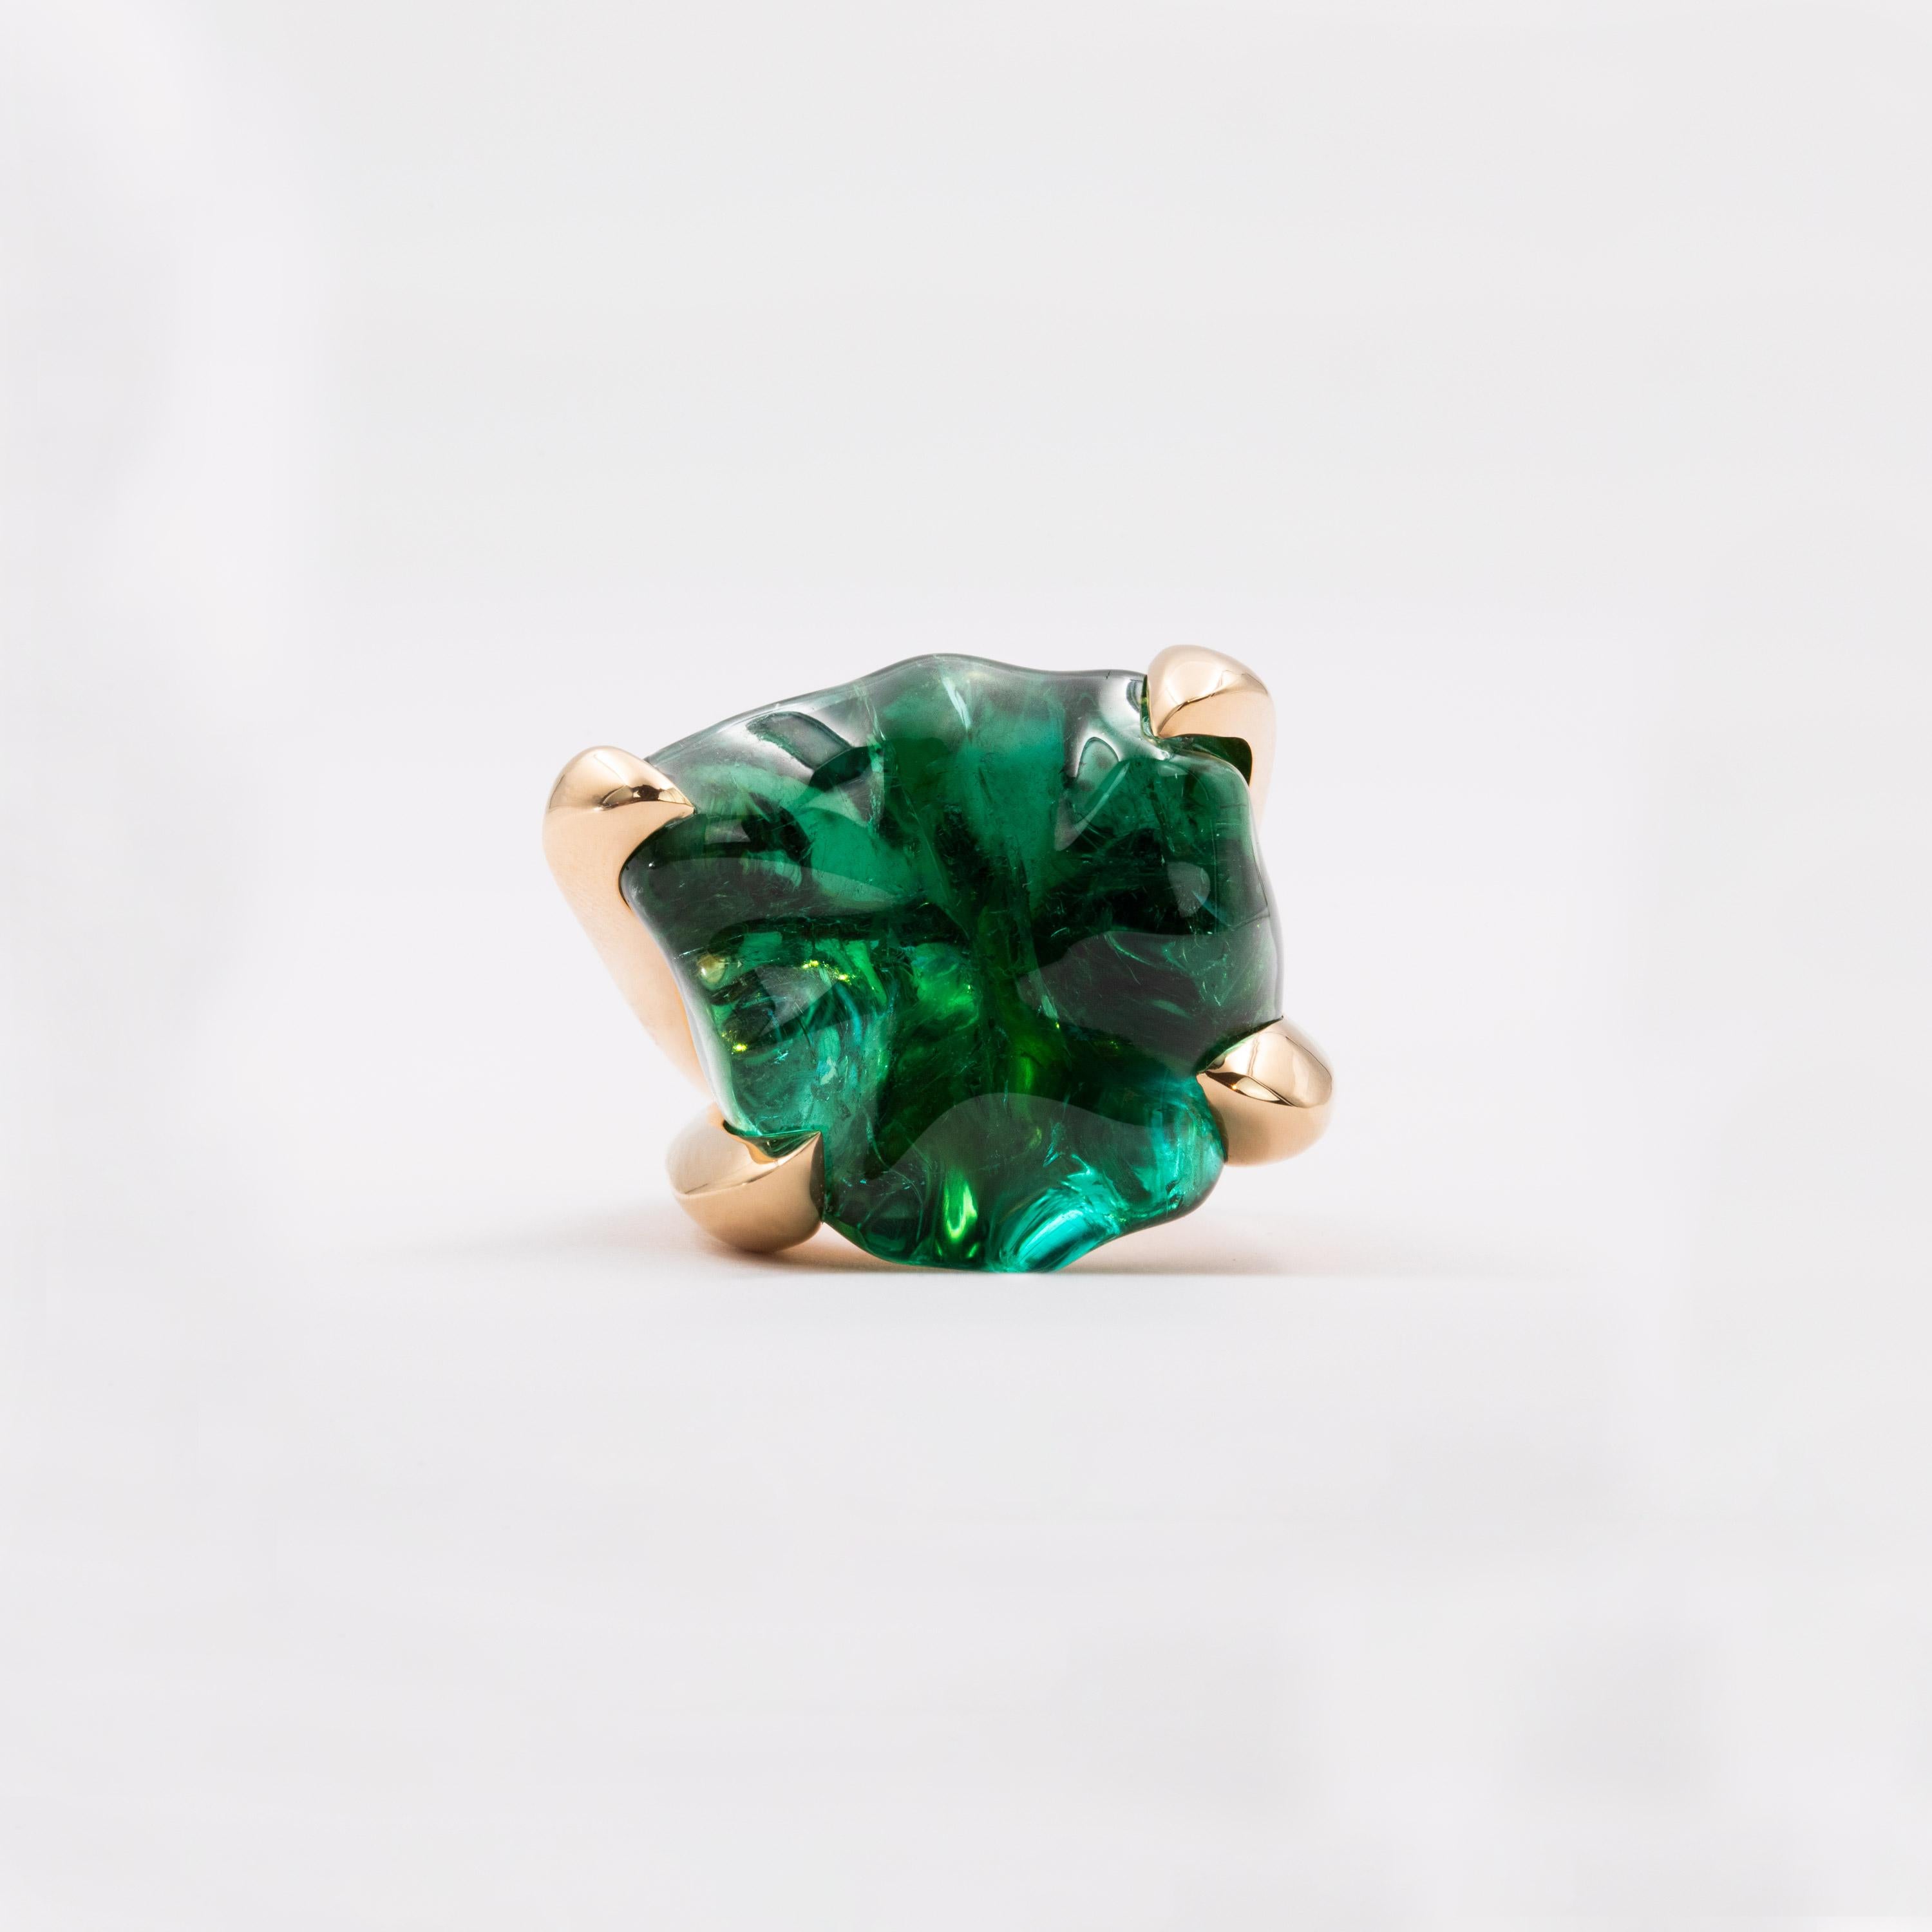 Old European Cut 53.49 Carat Pink Gold Baroque-Cut Green Tourmaline Cocktail Ring For Sale